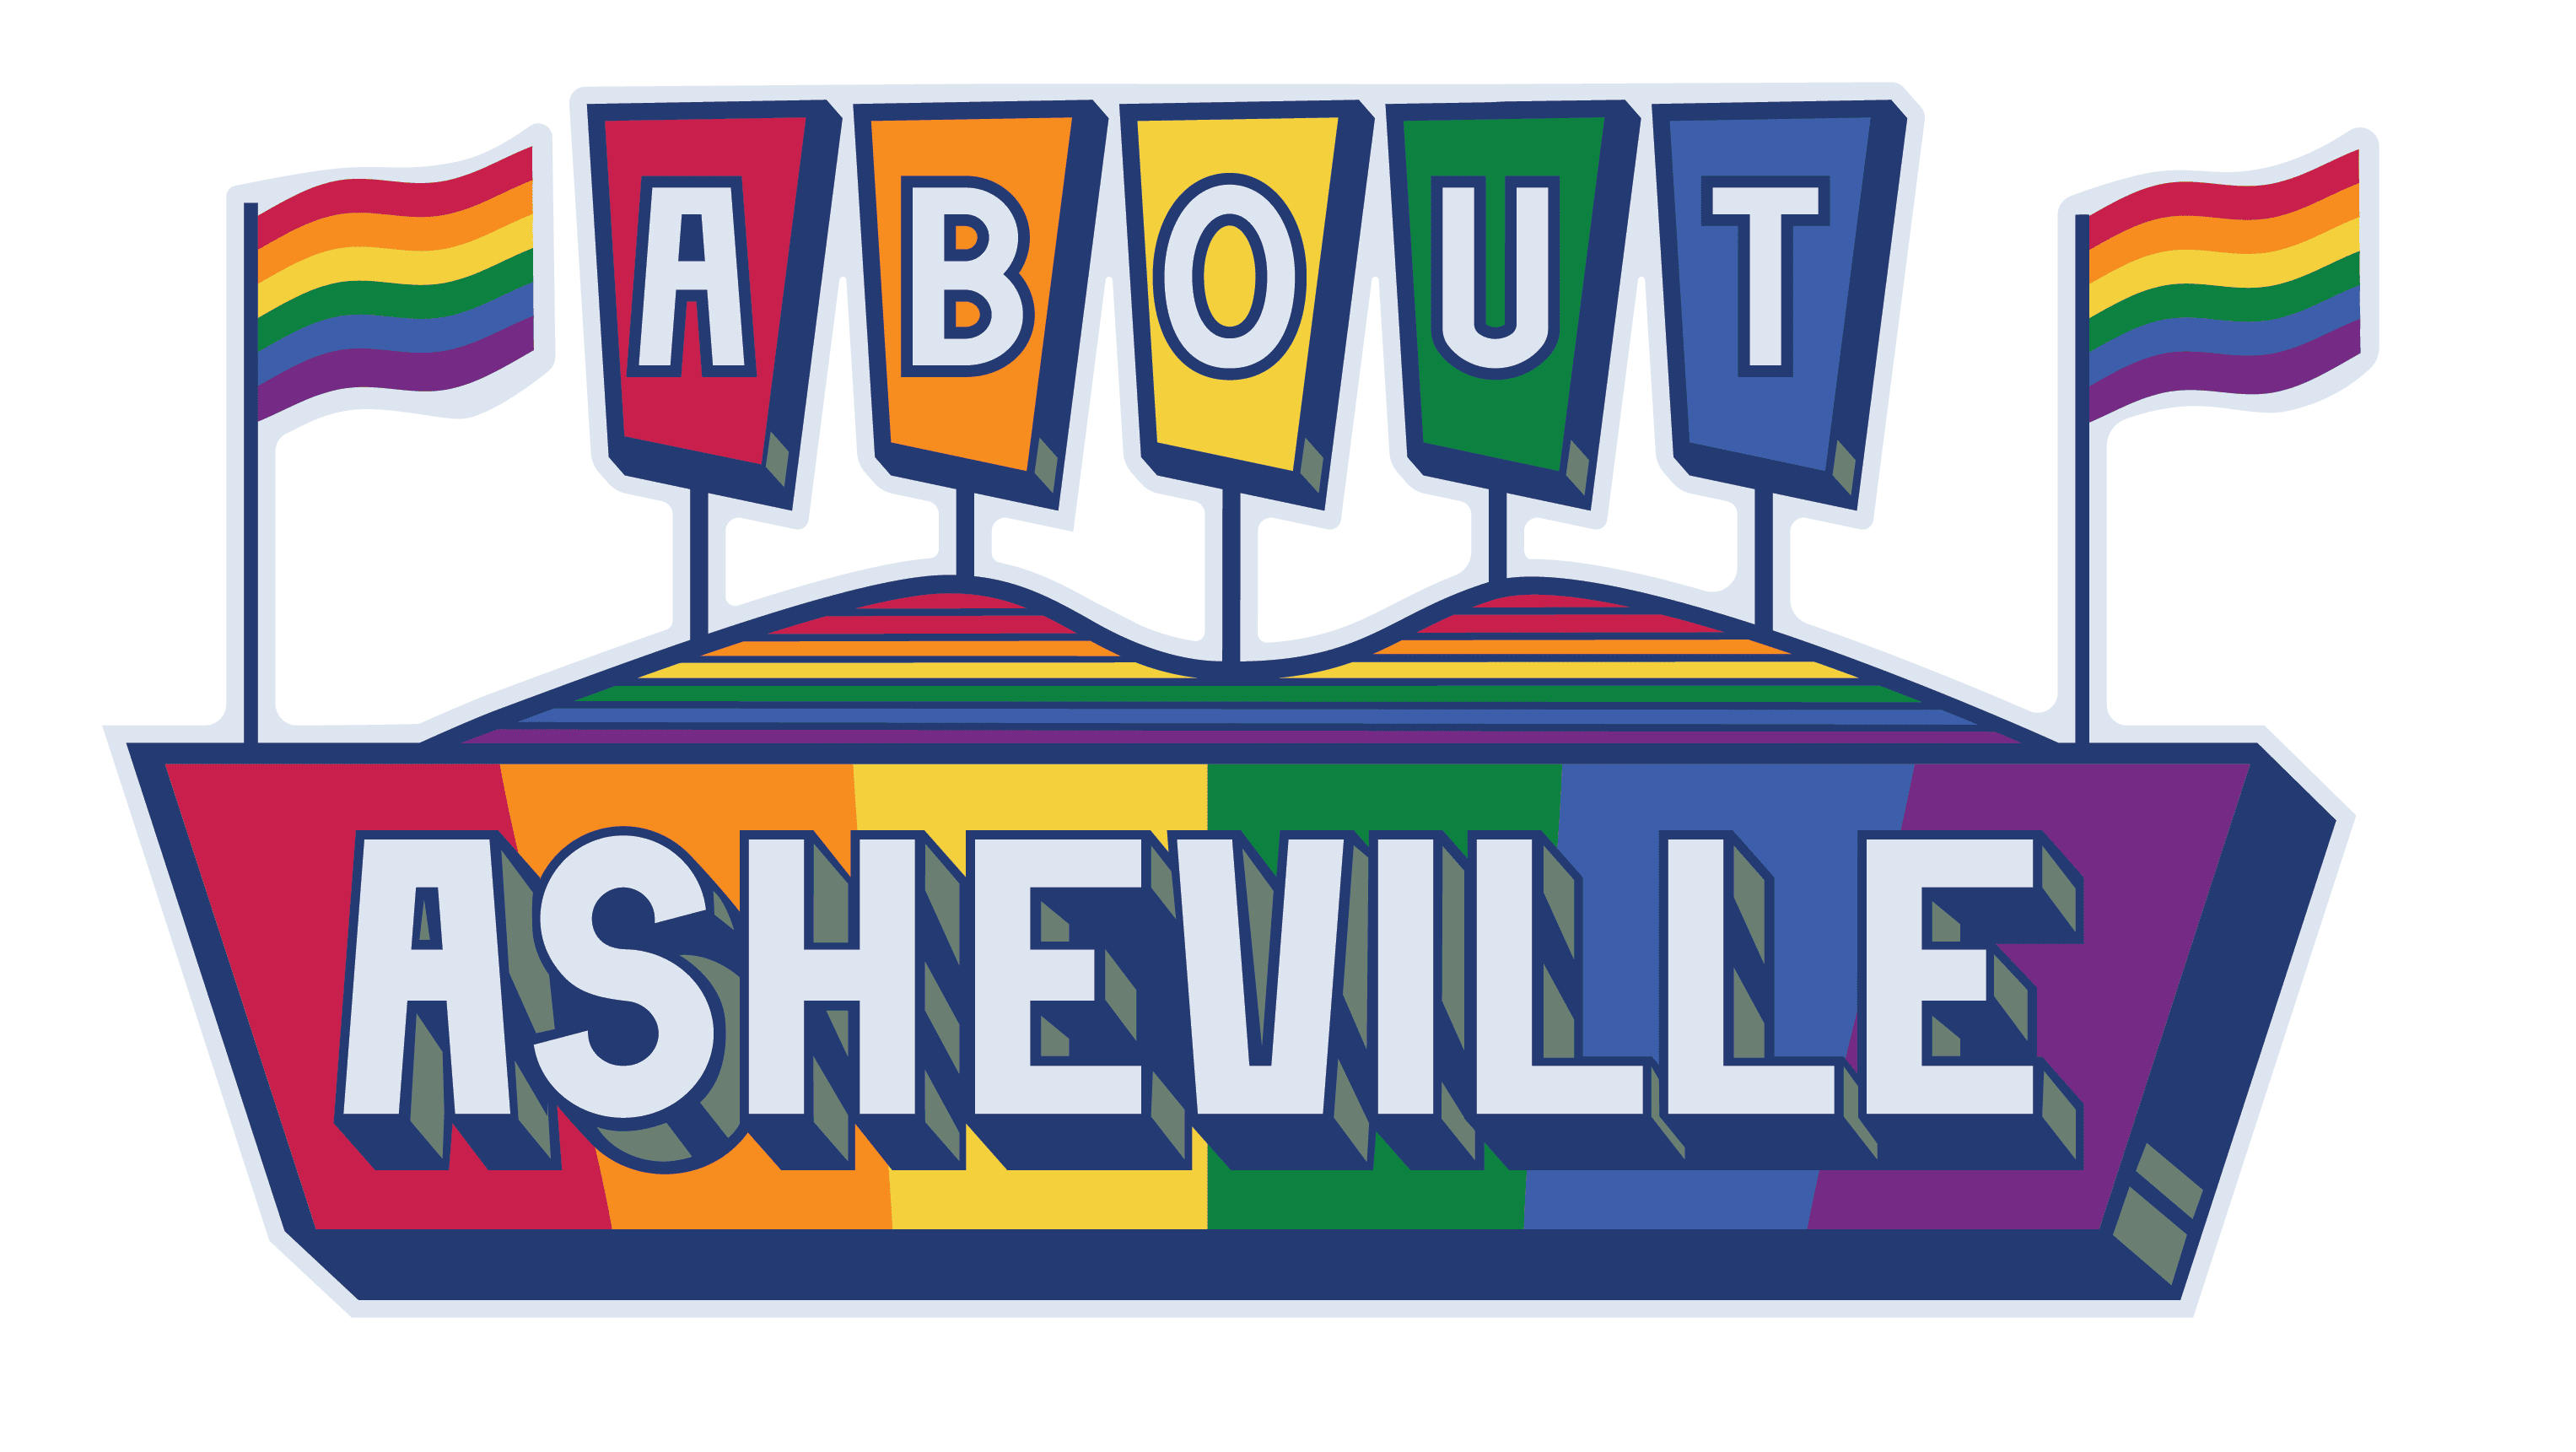 About Asheville